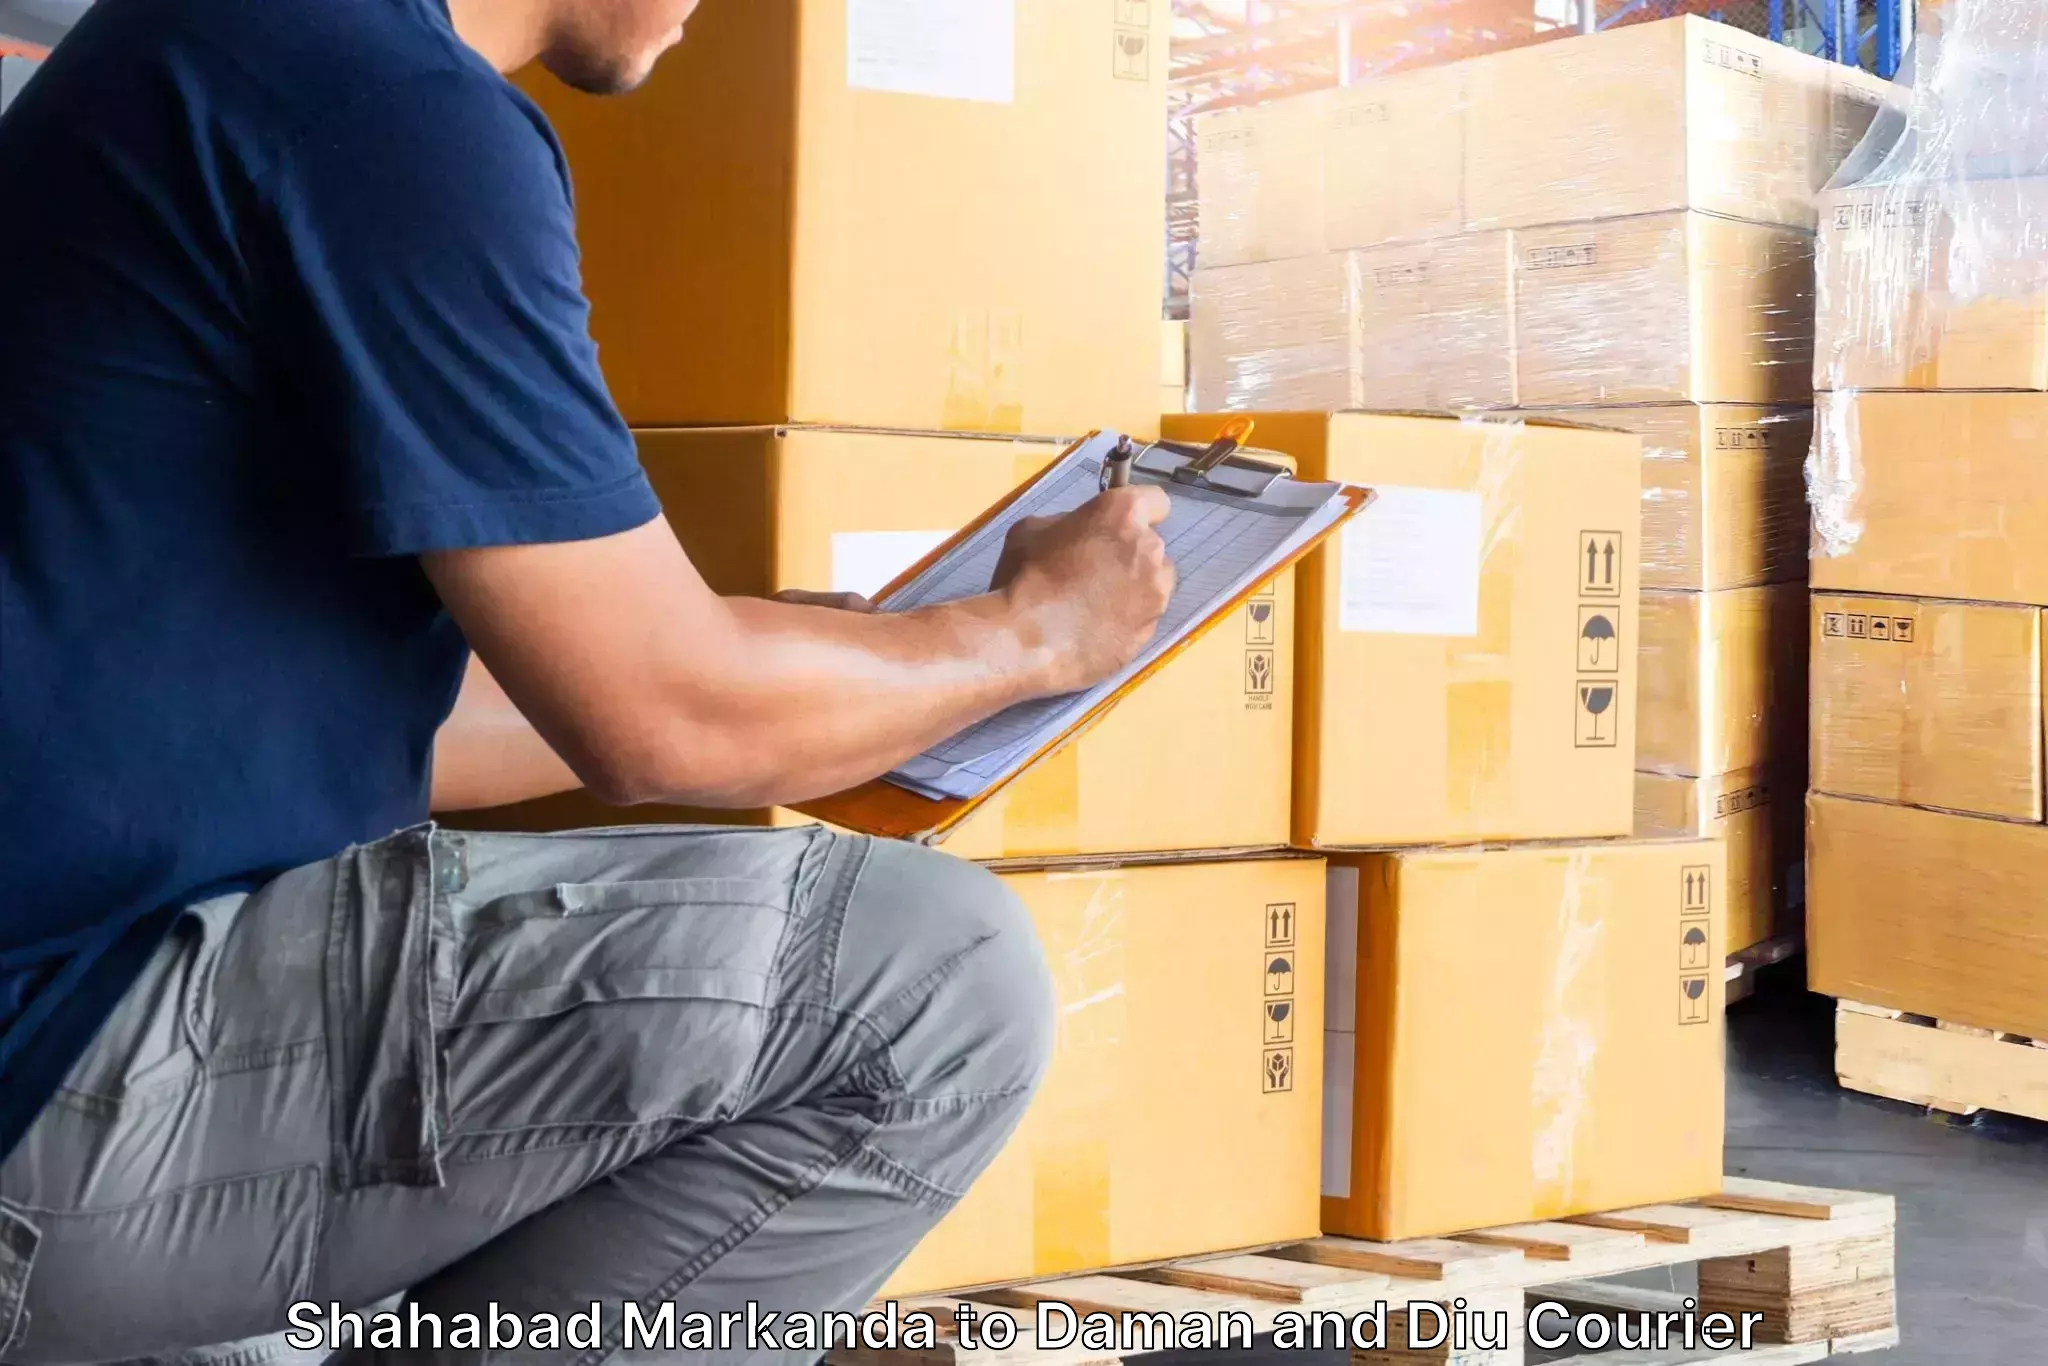 High-quality moving services in Shahabad Markanda to Daman